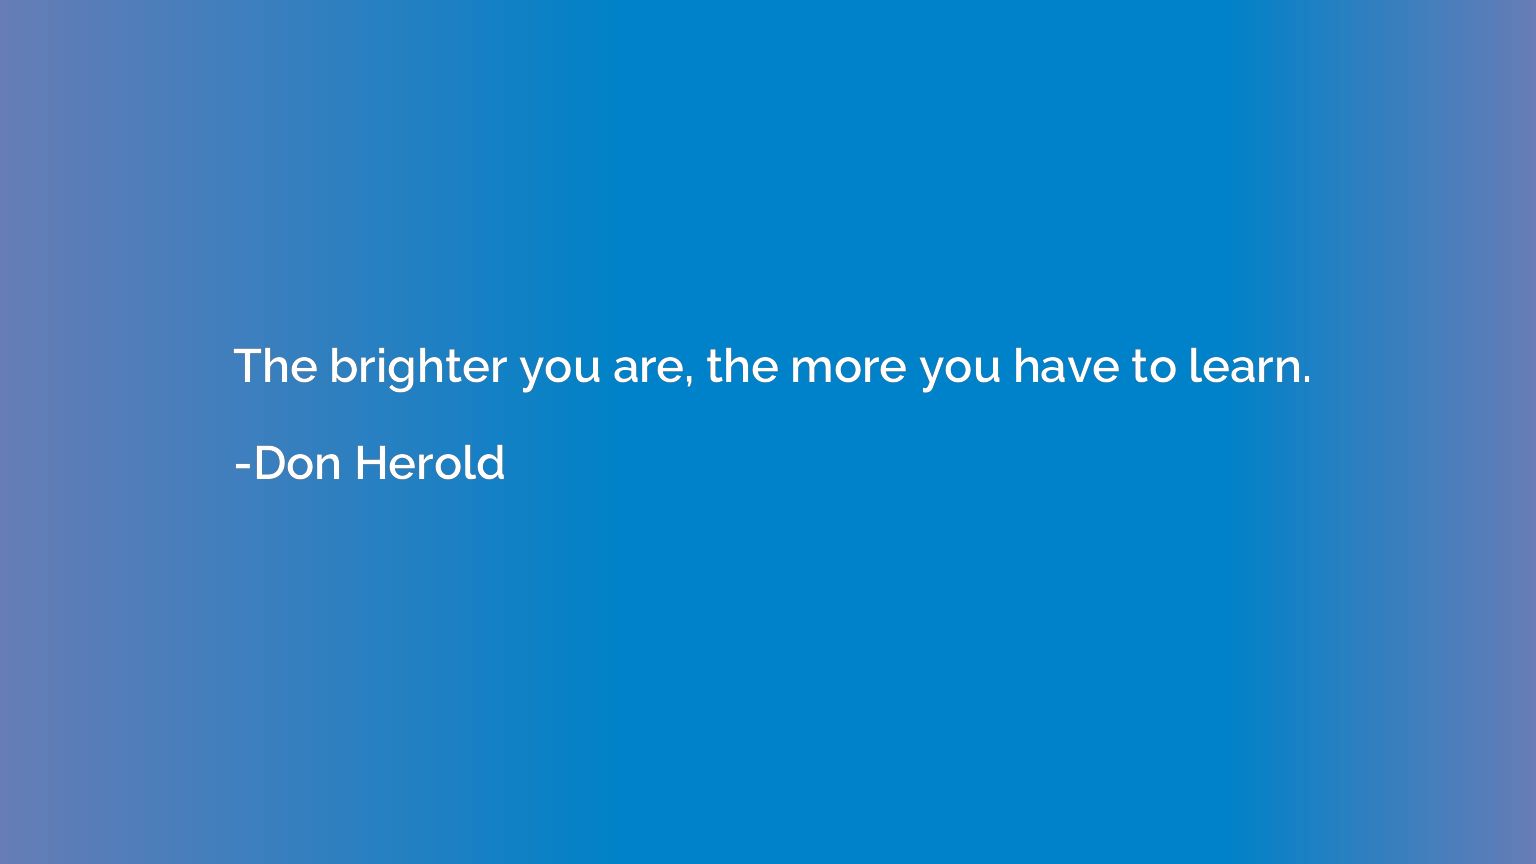 The brighter you are, the more you have to learn.